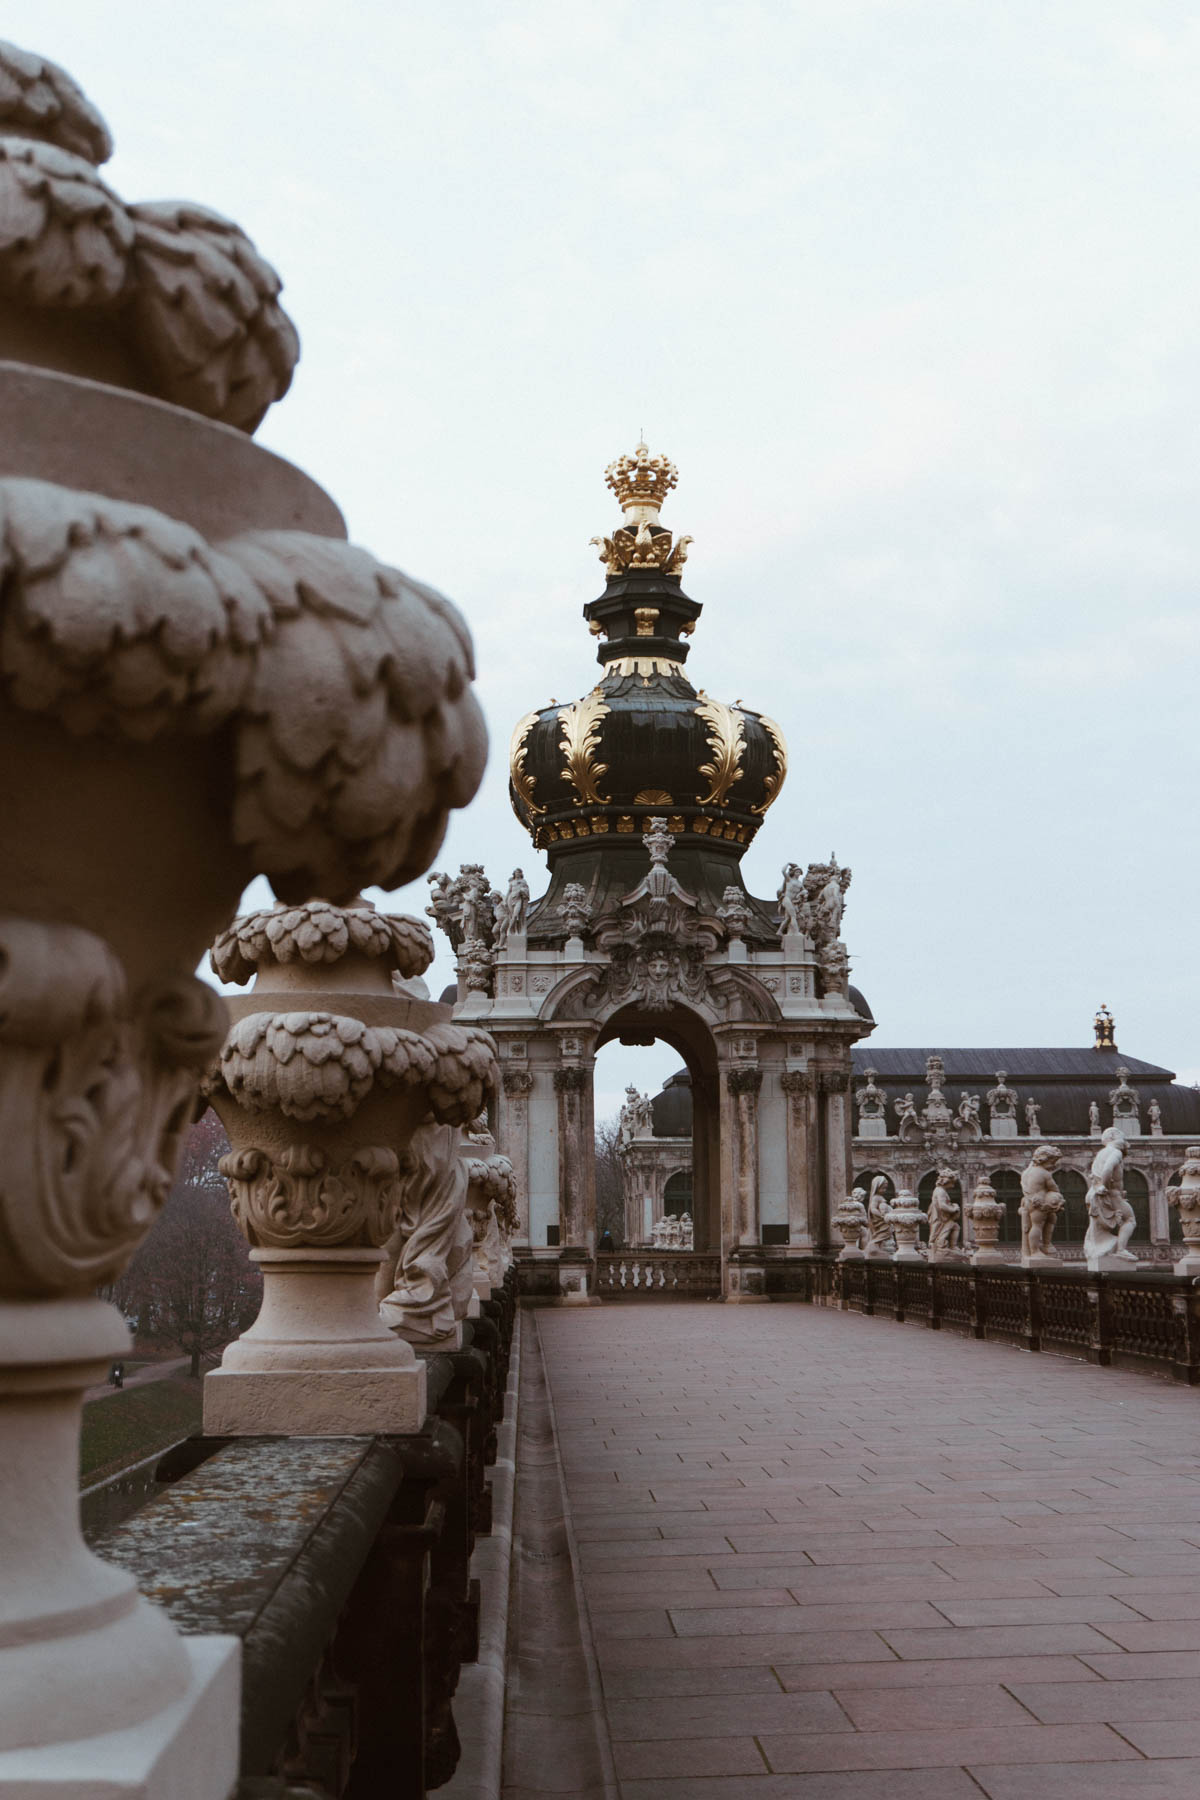 Dresden Germany Travel Guide - Day Trip from Berlin - European Architecture / RG Daily Blog